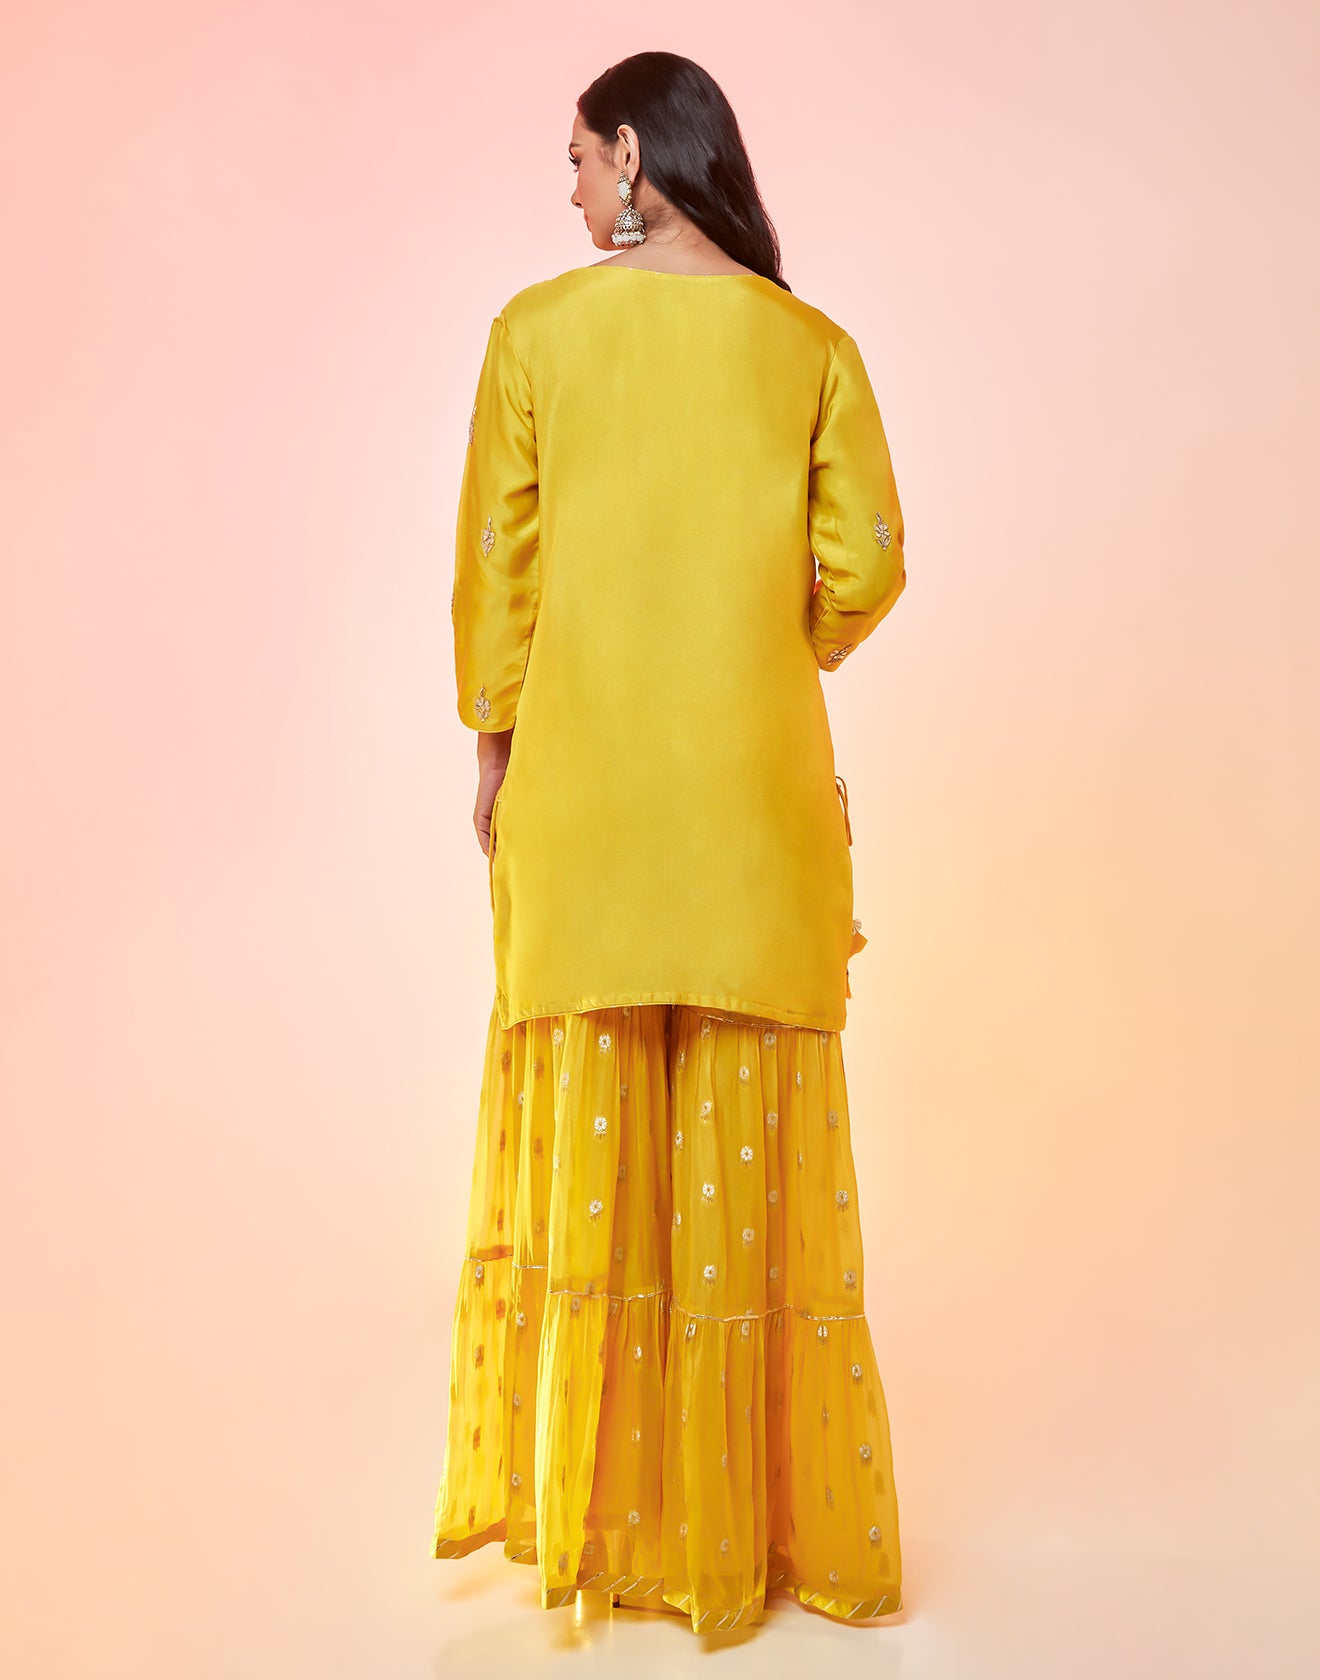 Bright Yellow Flared Sharara Suit Set With Golden Gota Work